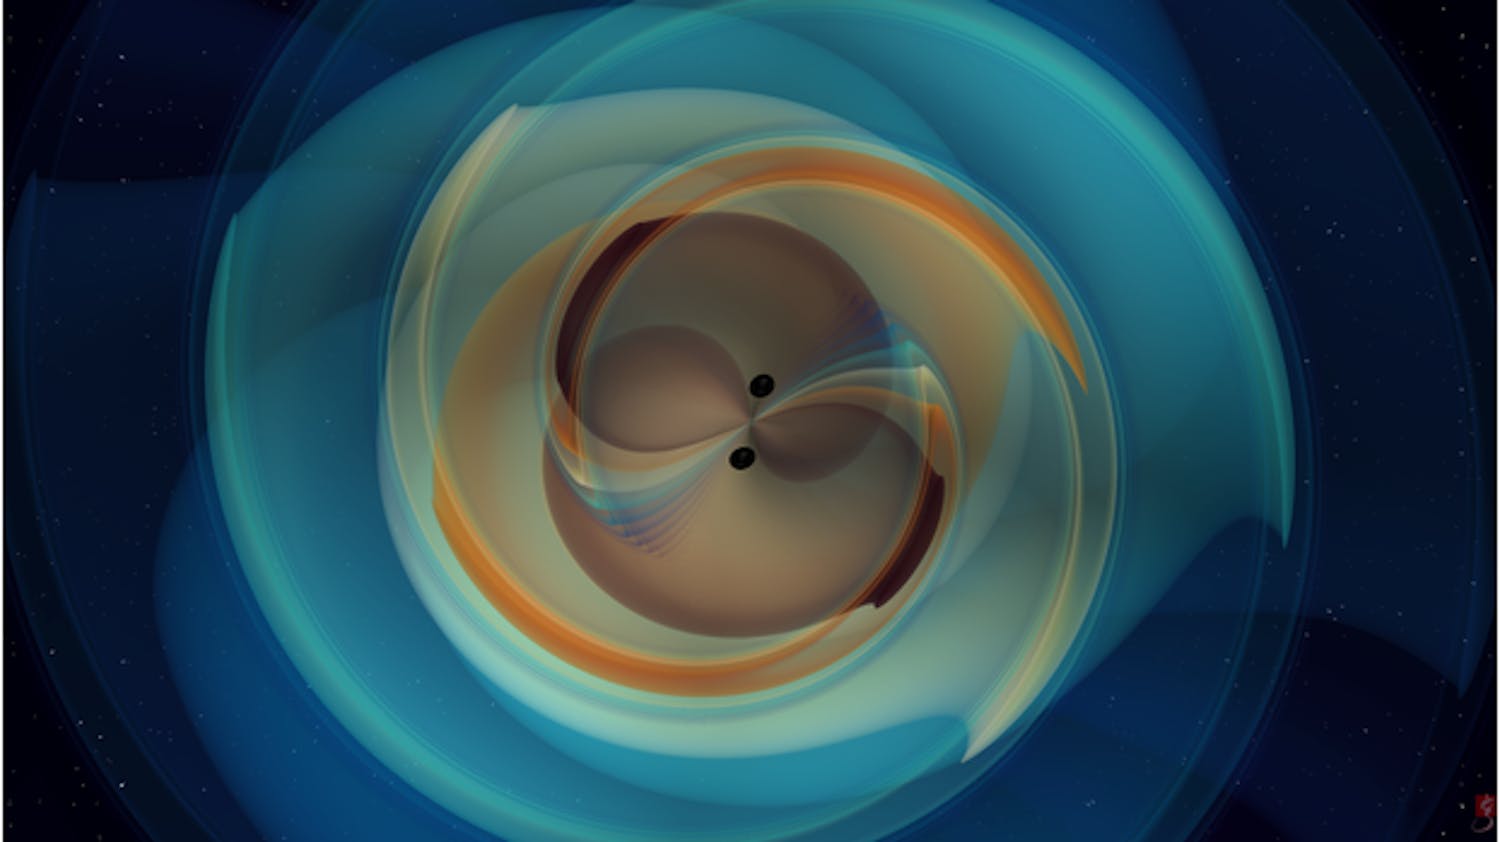 A still image from a numerical simulation of two black holes that inspiral and merge, emitting gravitational waves. (Credit: N. Fischer, H. Pfeiffer, A. Buonanno (Max Planck Institute for Gravitational Physics), Simulating eXtreme Spacetimes (SXS) Collaboration)